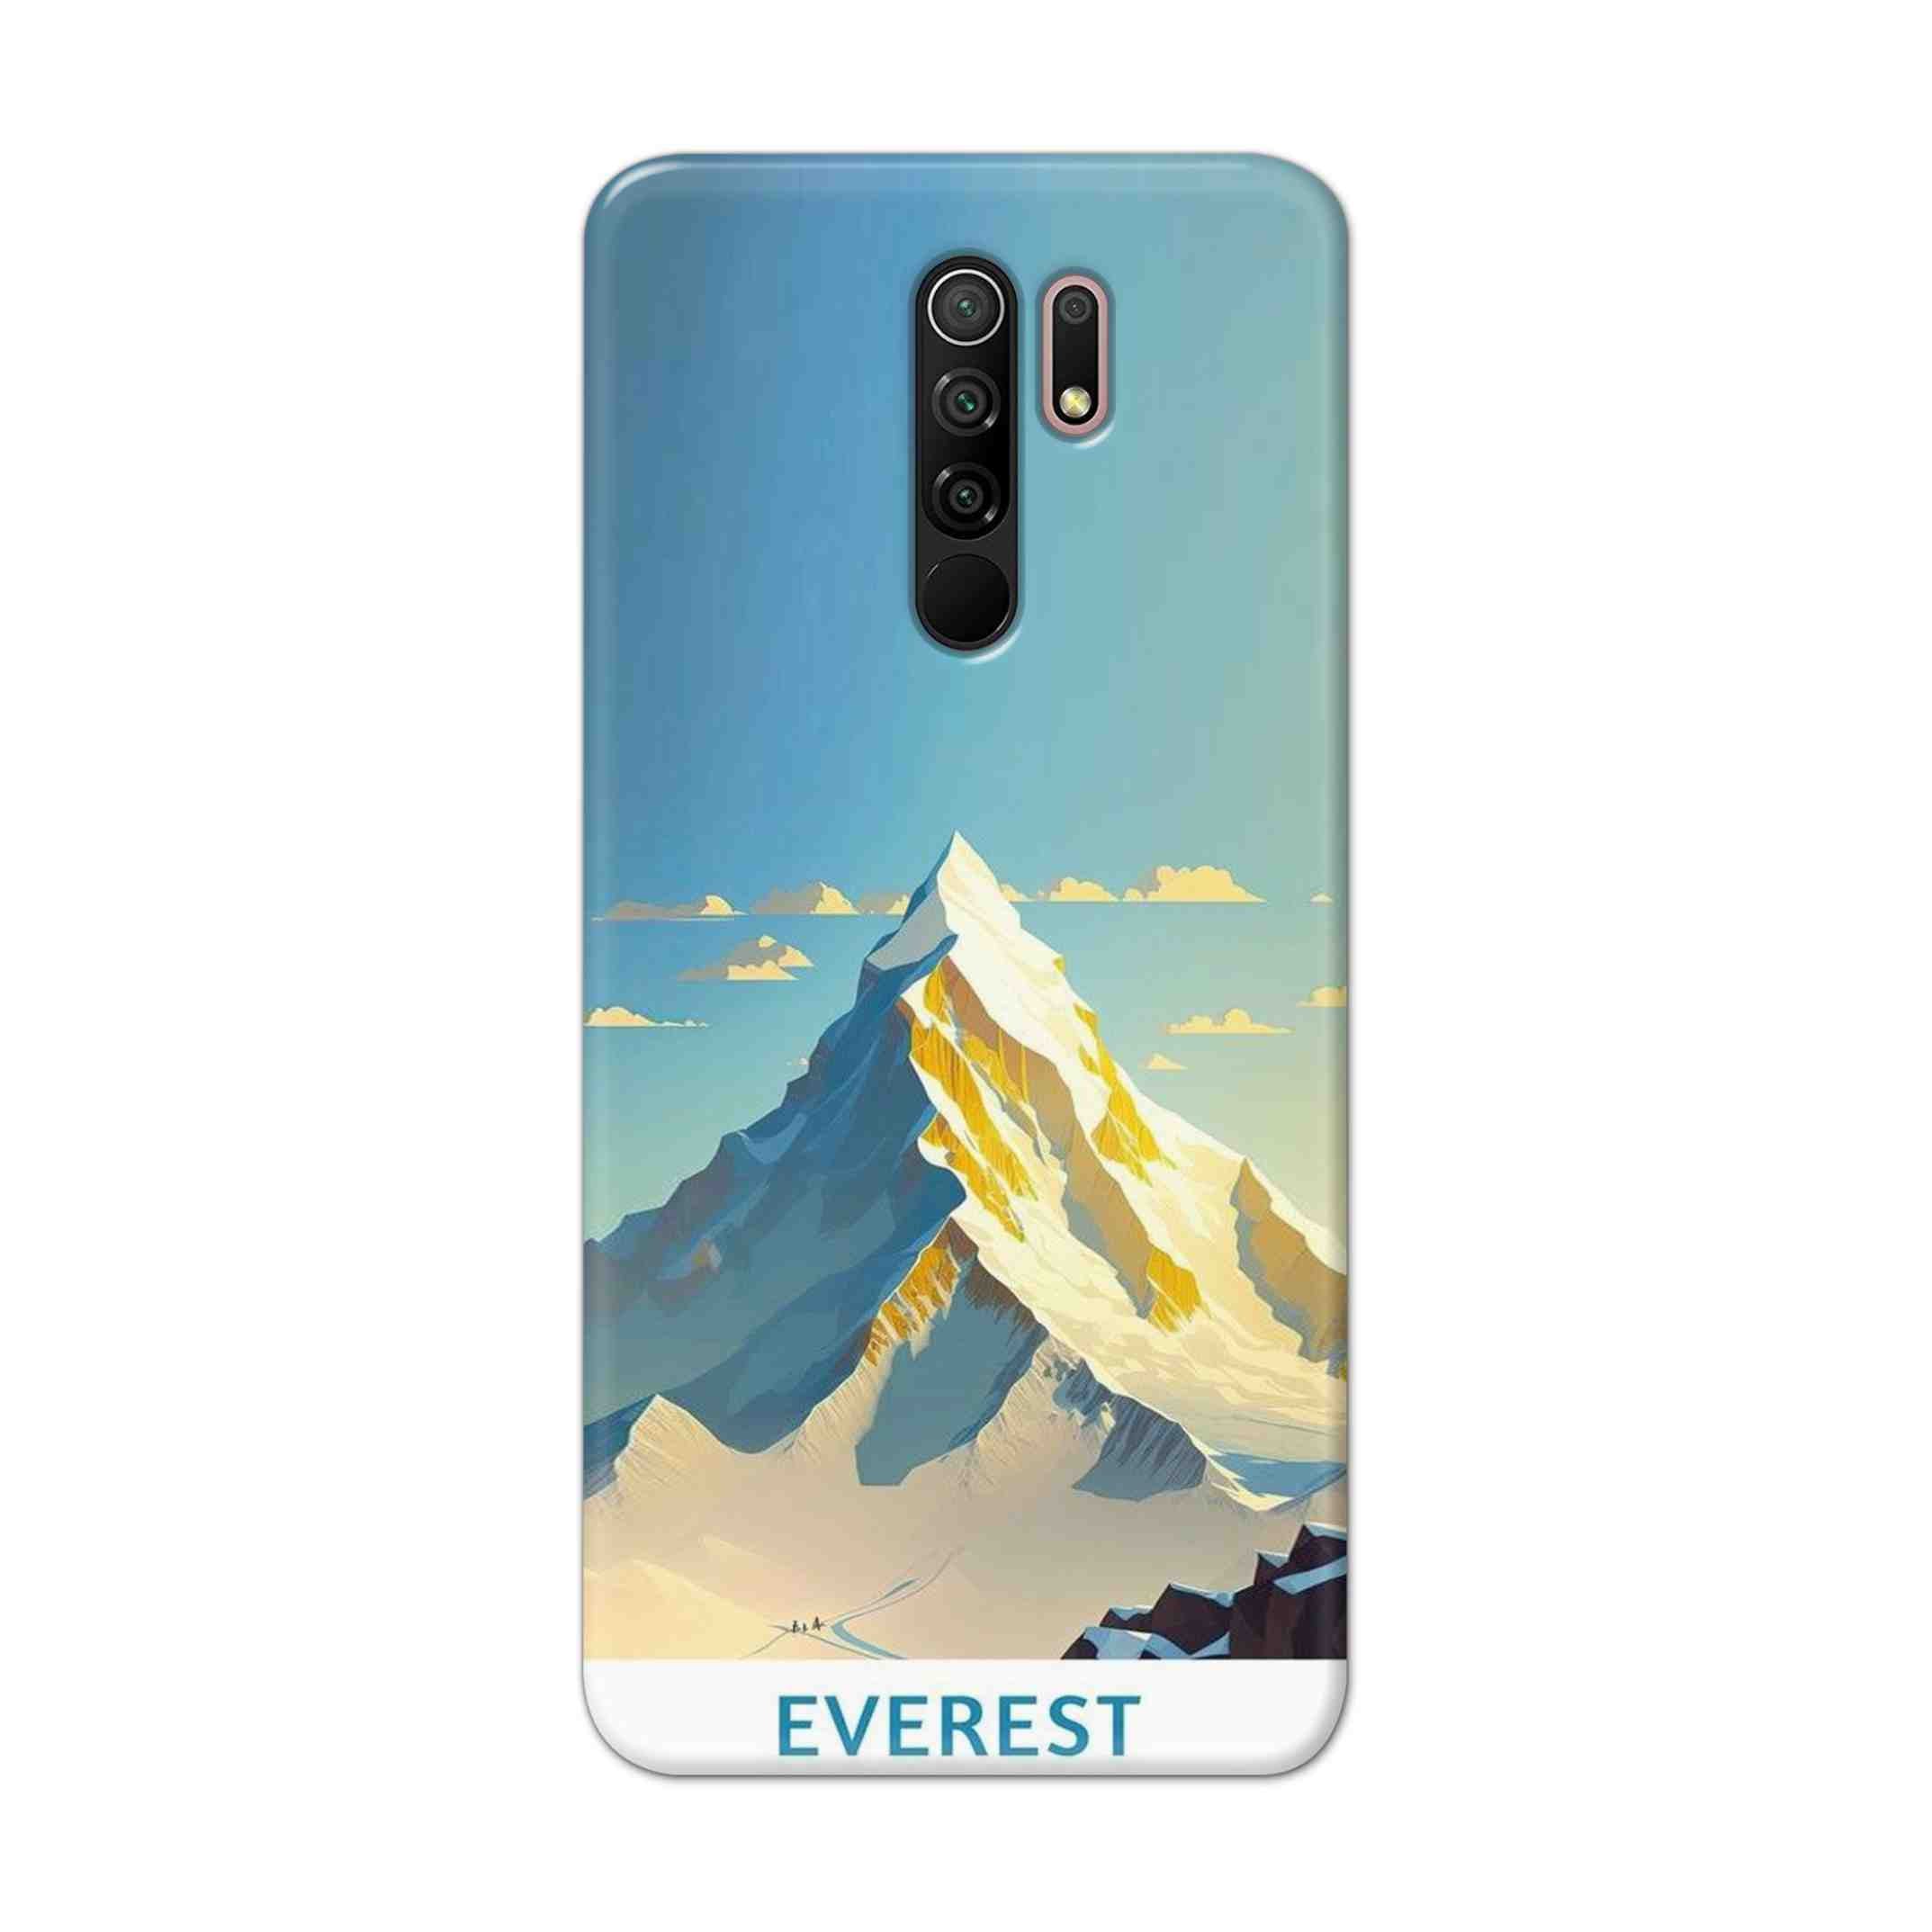 Buy Everest Hard Back Mobile Phone Case Cover For Xiaomi Redmi 9 Prime Online